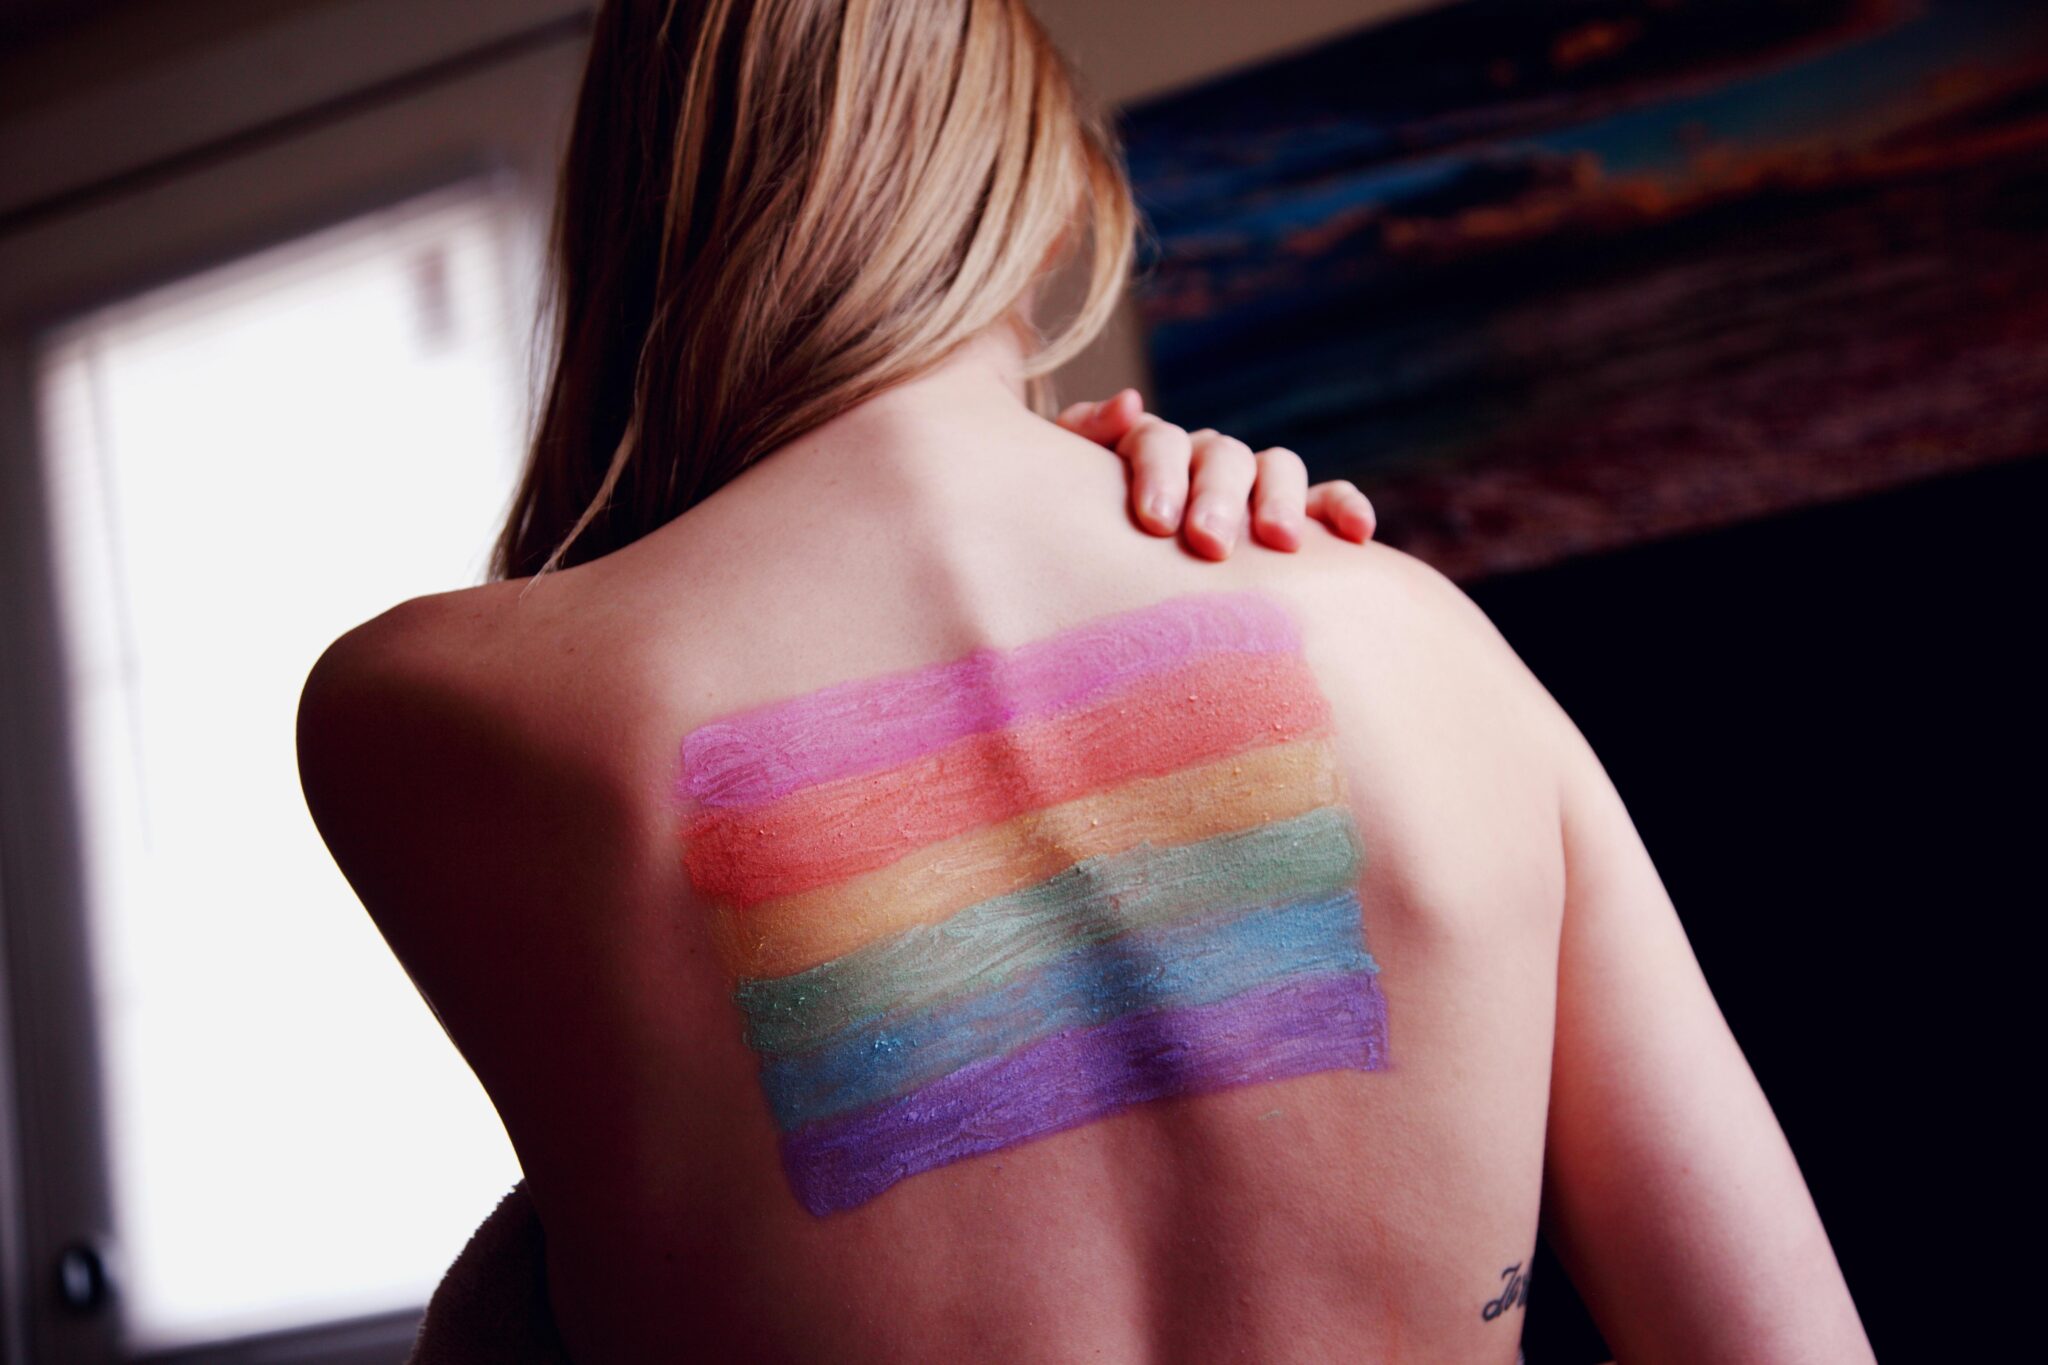 woman with Pride flag on her back. Addressing and Preventing Trafficking of LGBTQ People